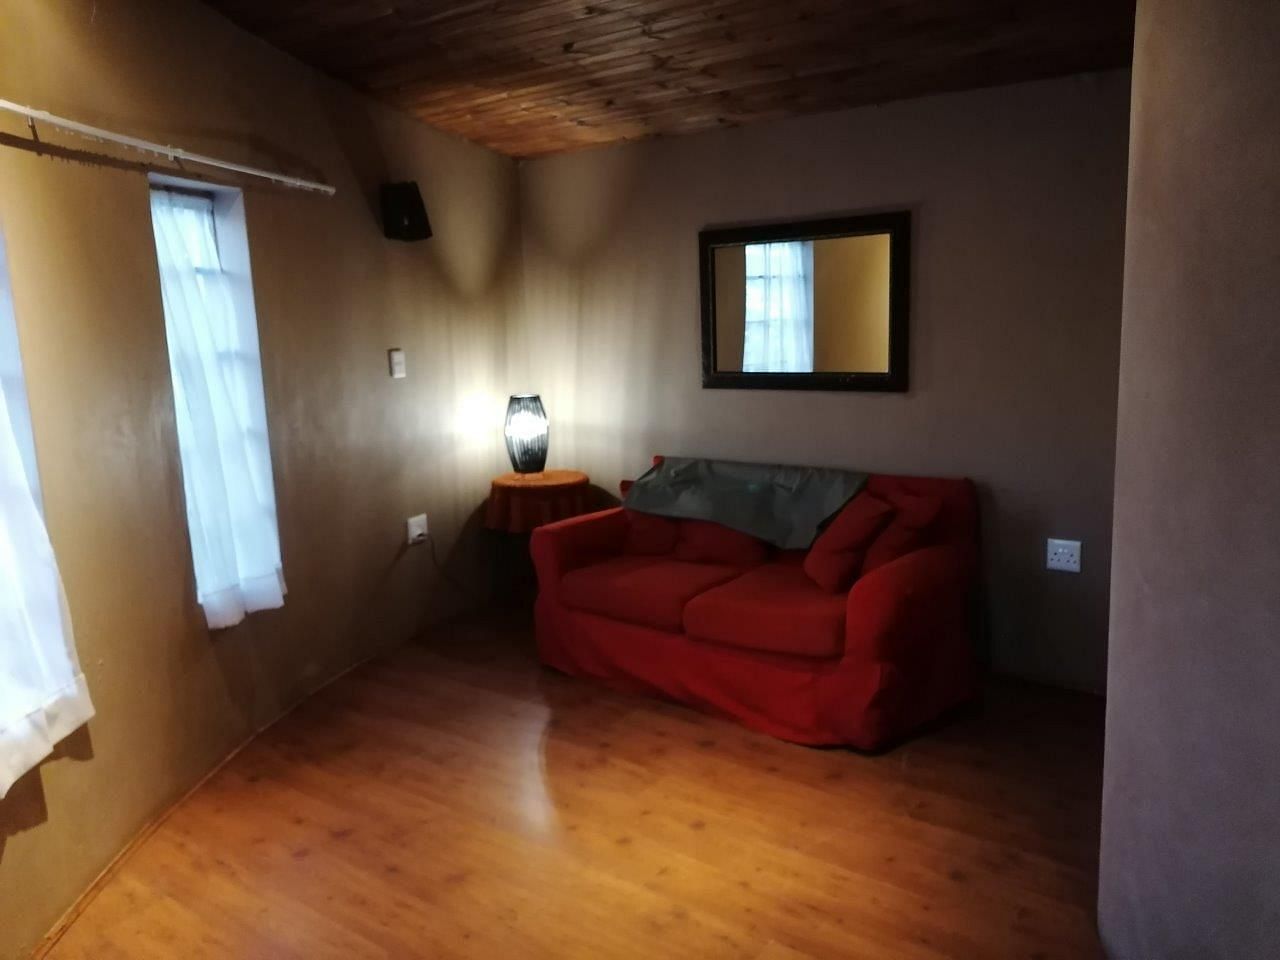 JWguest Apartment at Cape Town, Western Cape | Lovely 1 bedroom apartment in gordons bay south africa | Jwbnb no brobnb 9